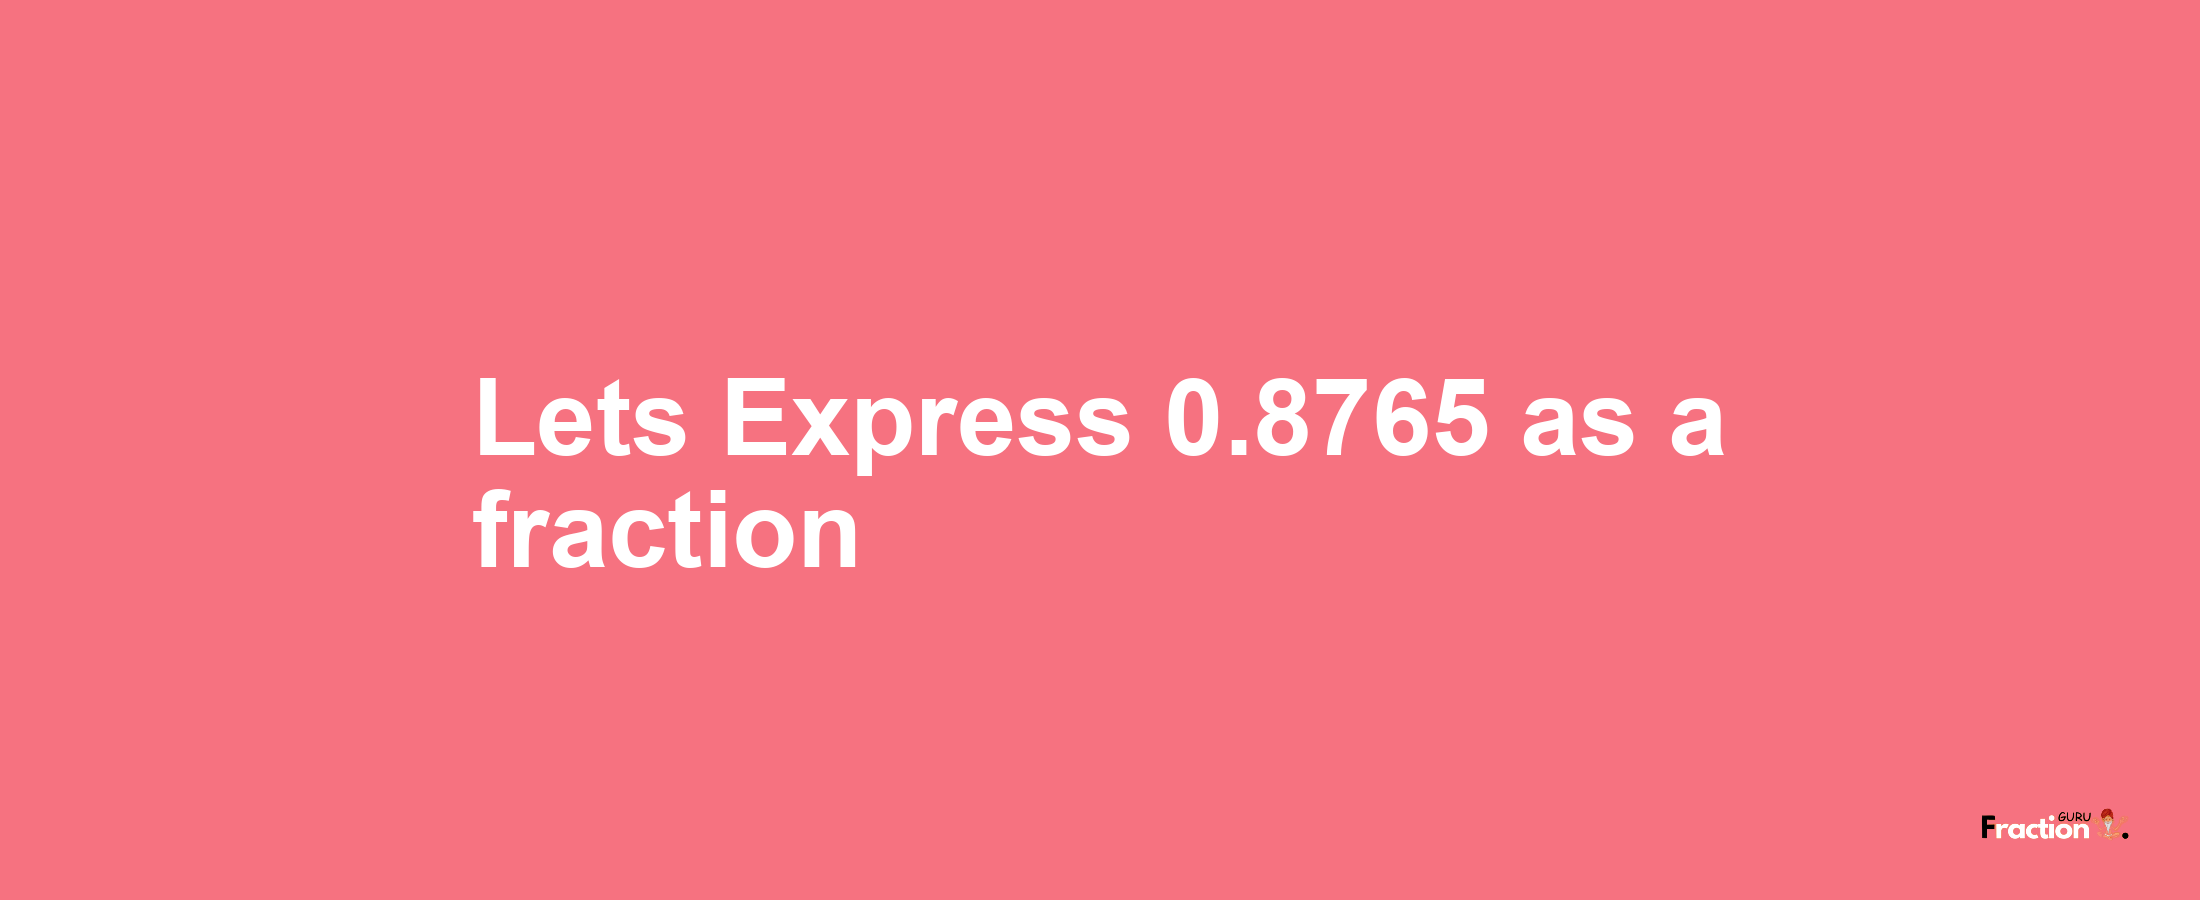 Lets Express 0.8765 as afraction